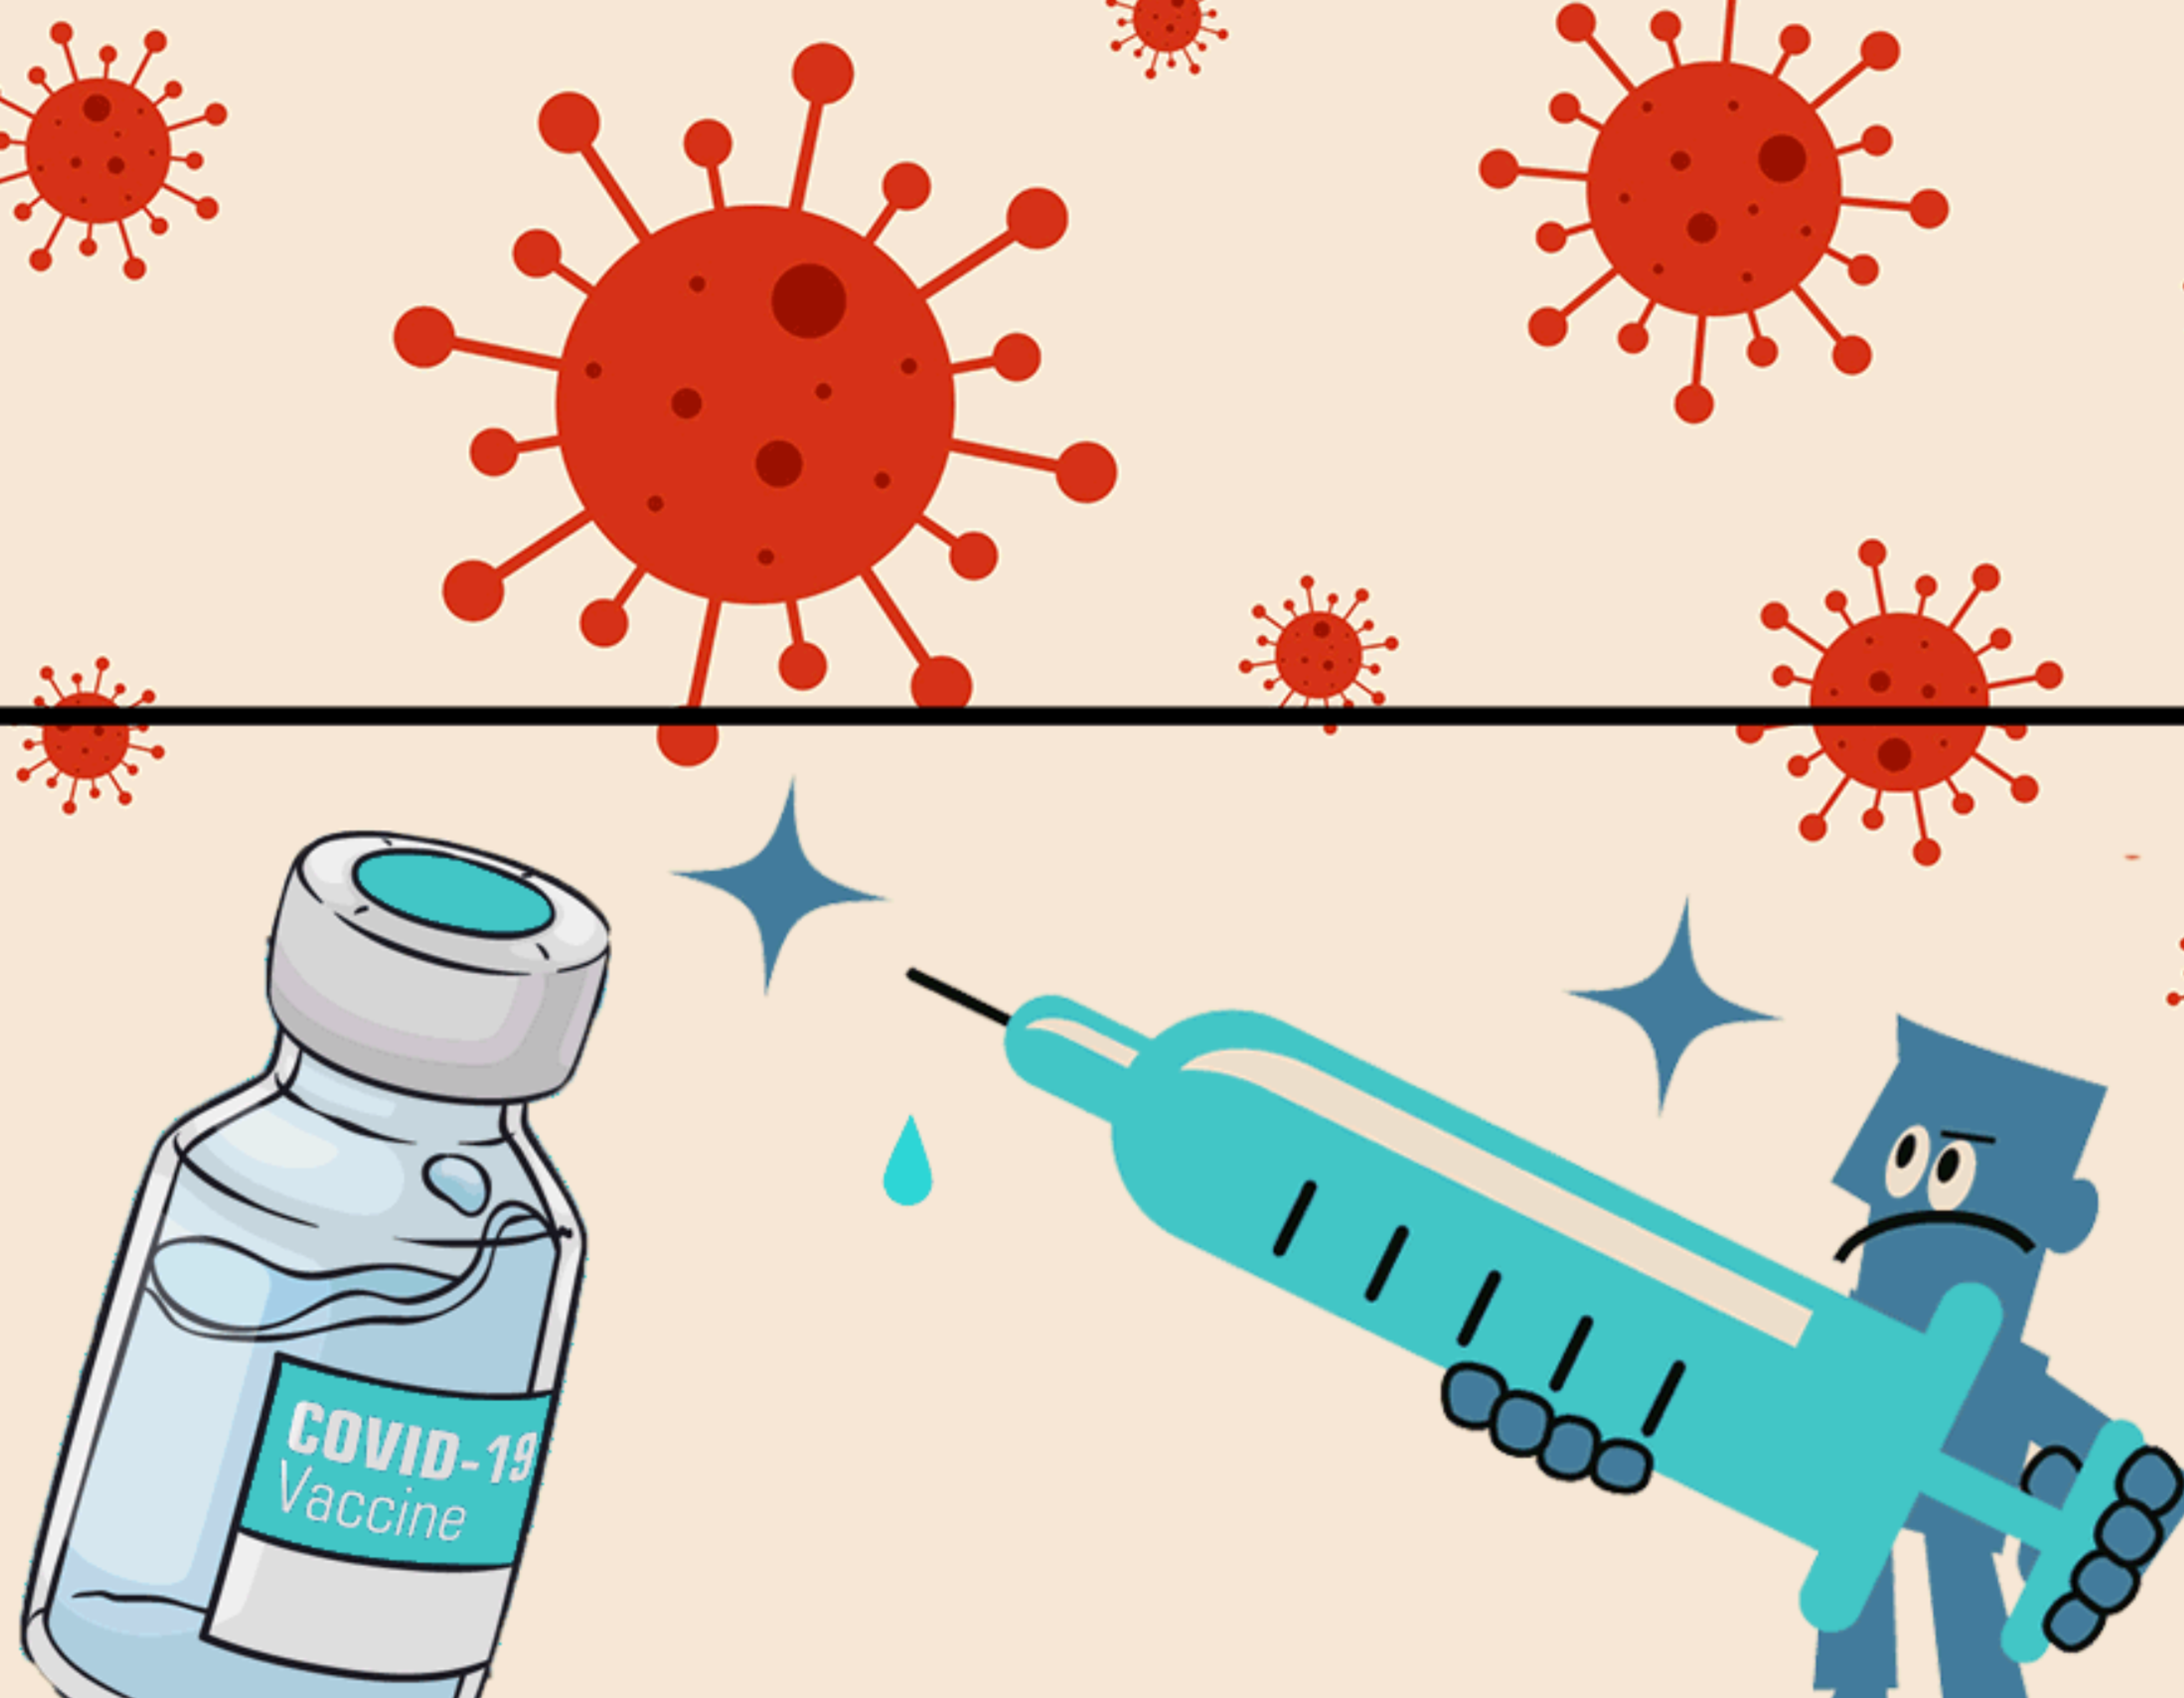 Animated person holding syringe and bottle of COVID vaccine